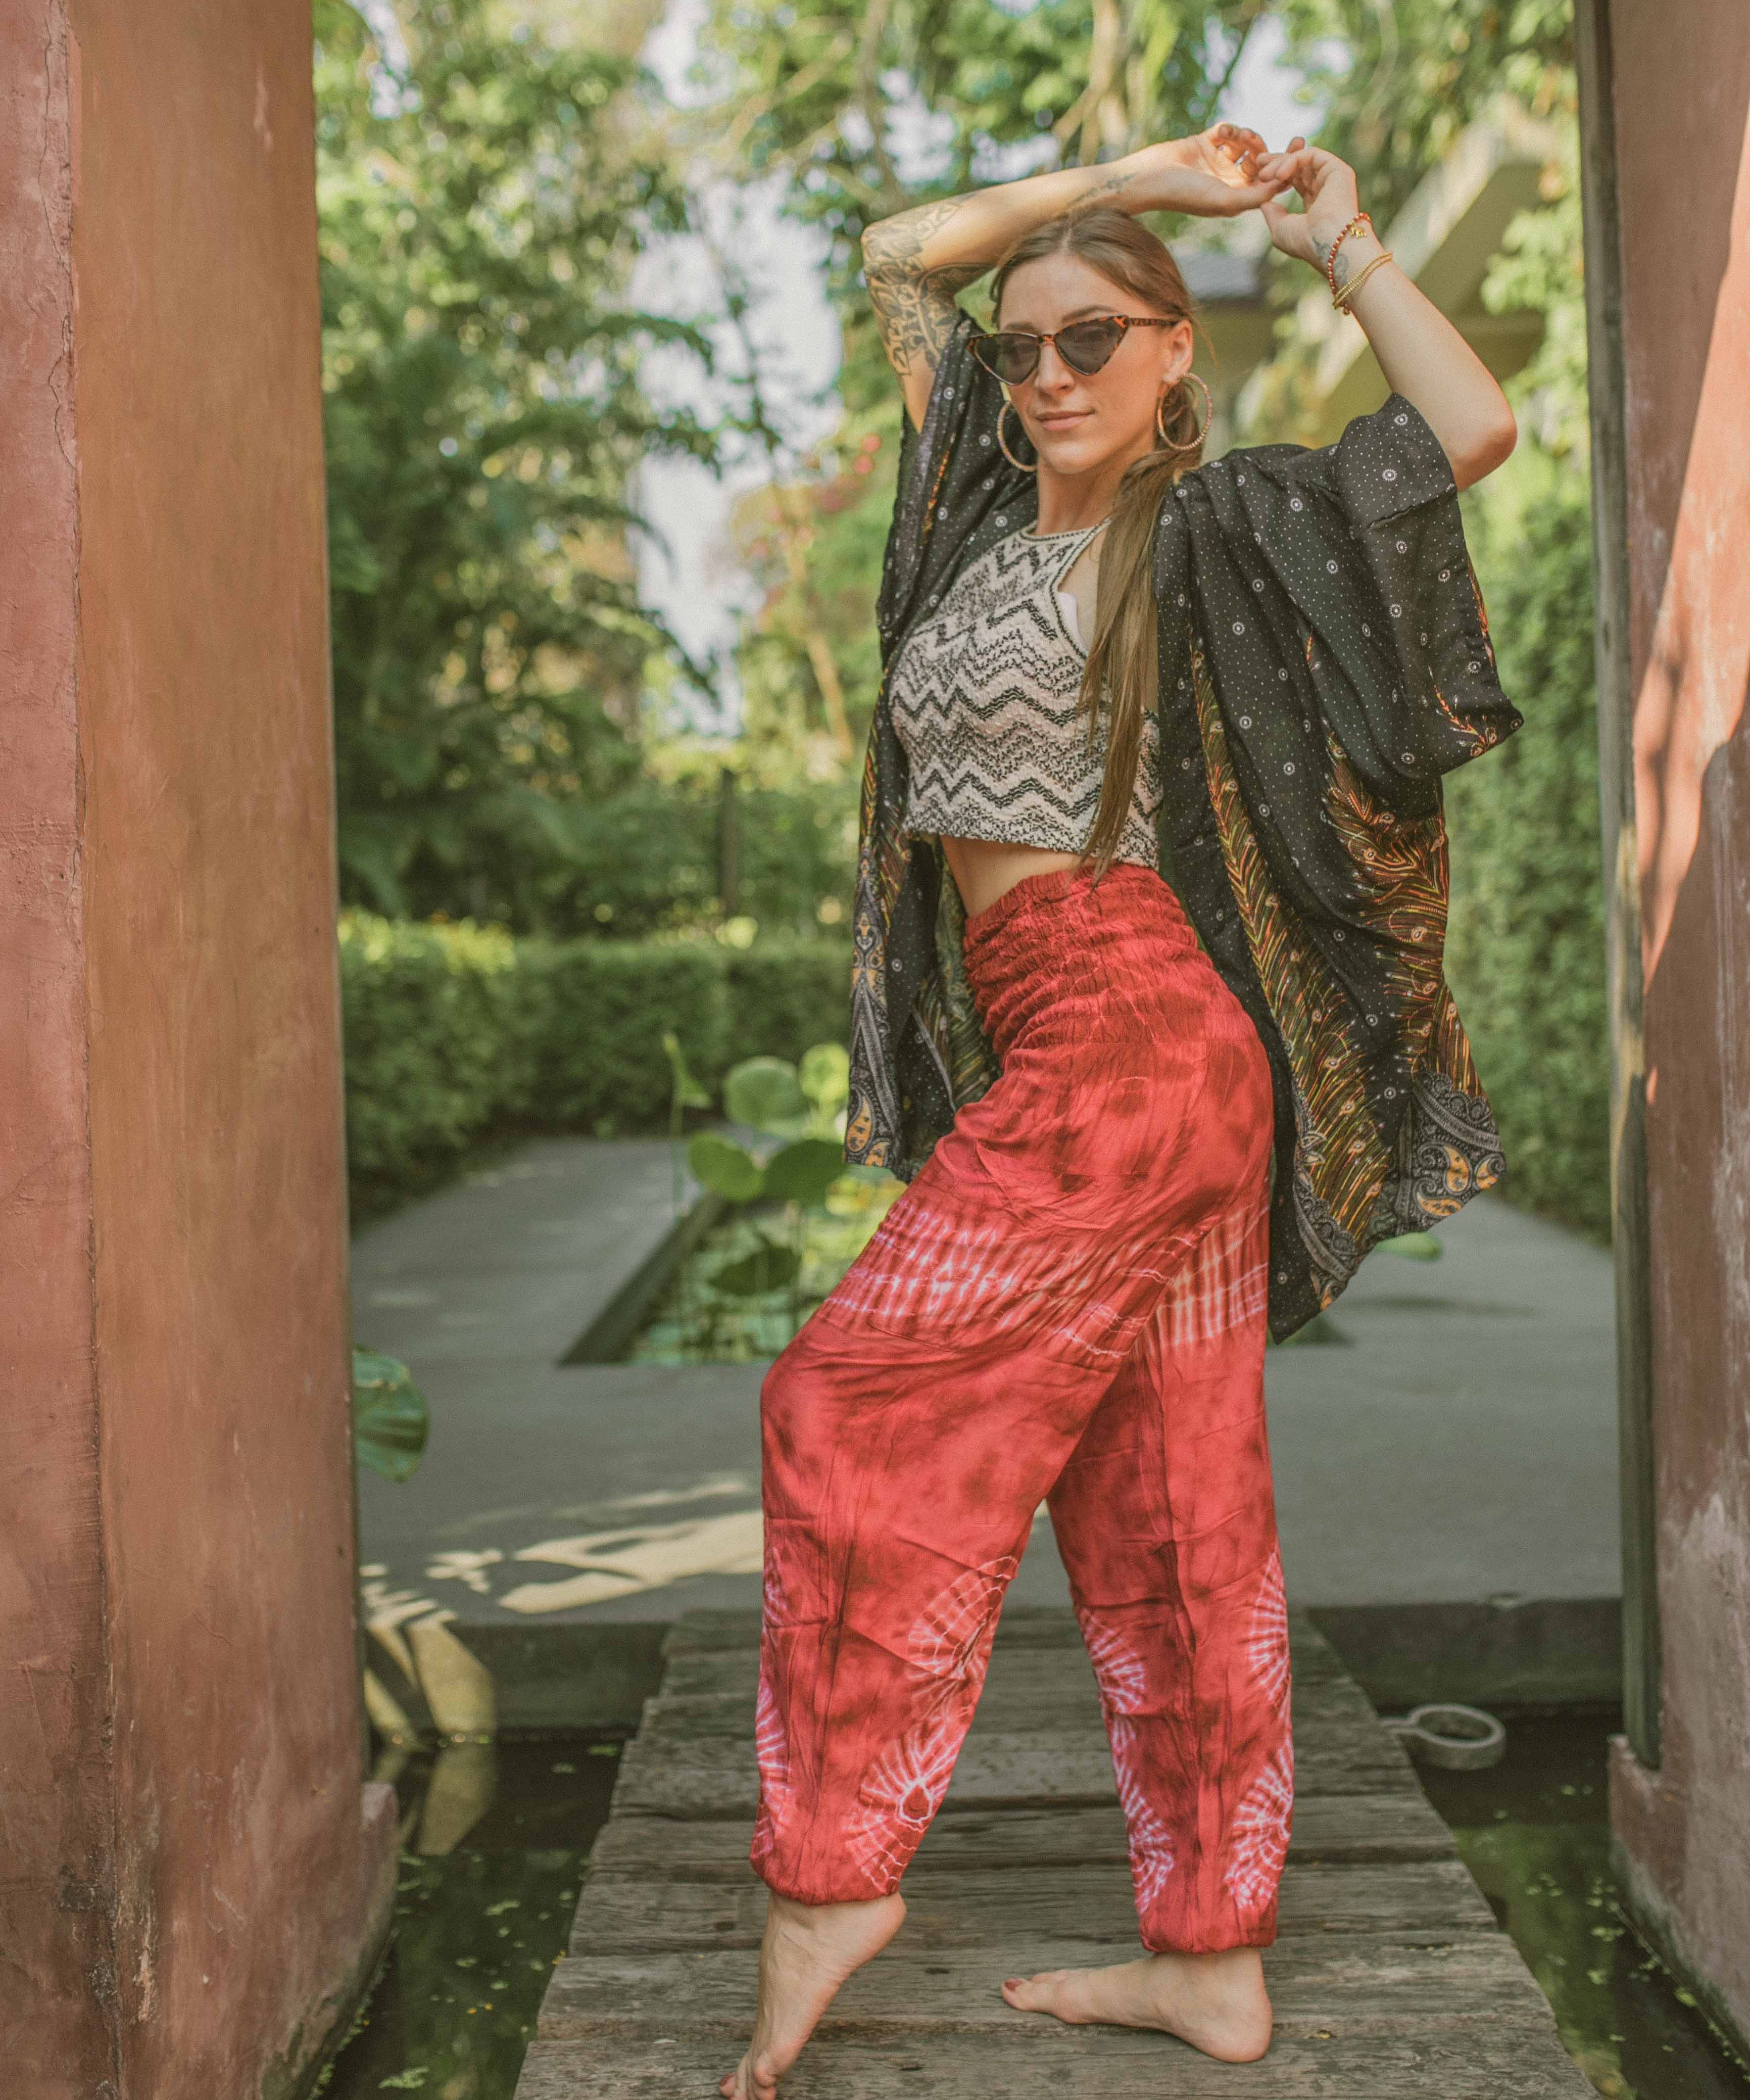 TIE DYE PANTS - RED Elepanta Elastic Waist | Harem Pants - Buy Today Elephant Pants Jewelry And Bohemian Clothes Handmade In Thailand Help To Save The Elephants FairTrade And Vegan